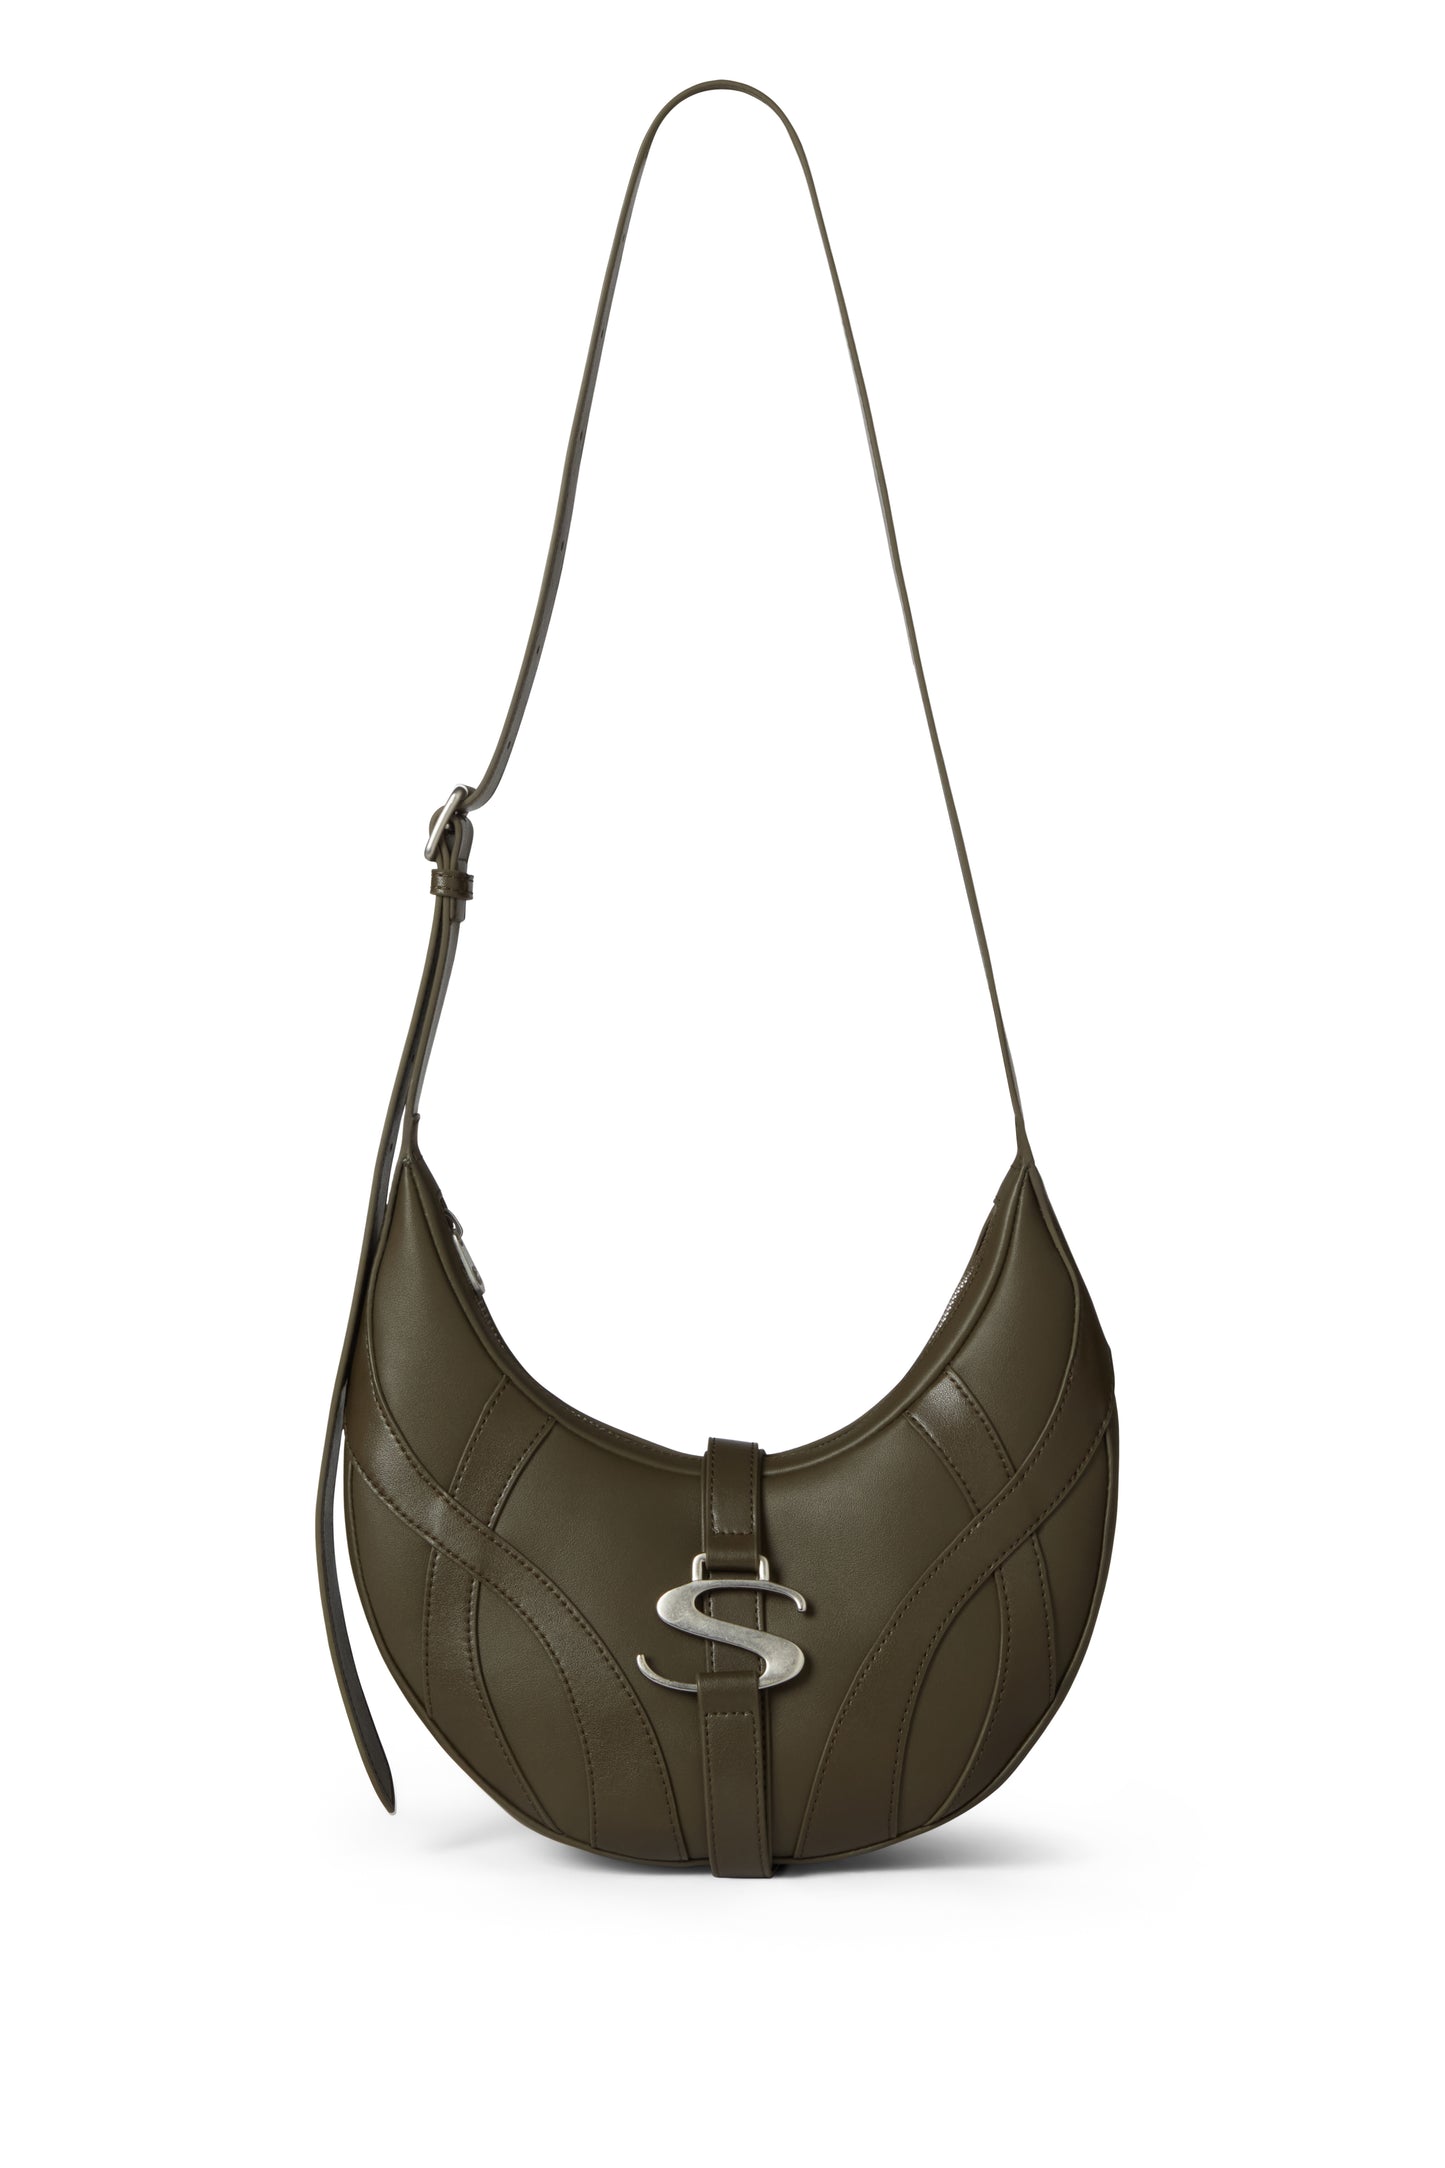 SRVC CABLE BAG OLIVE